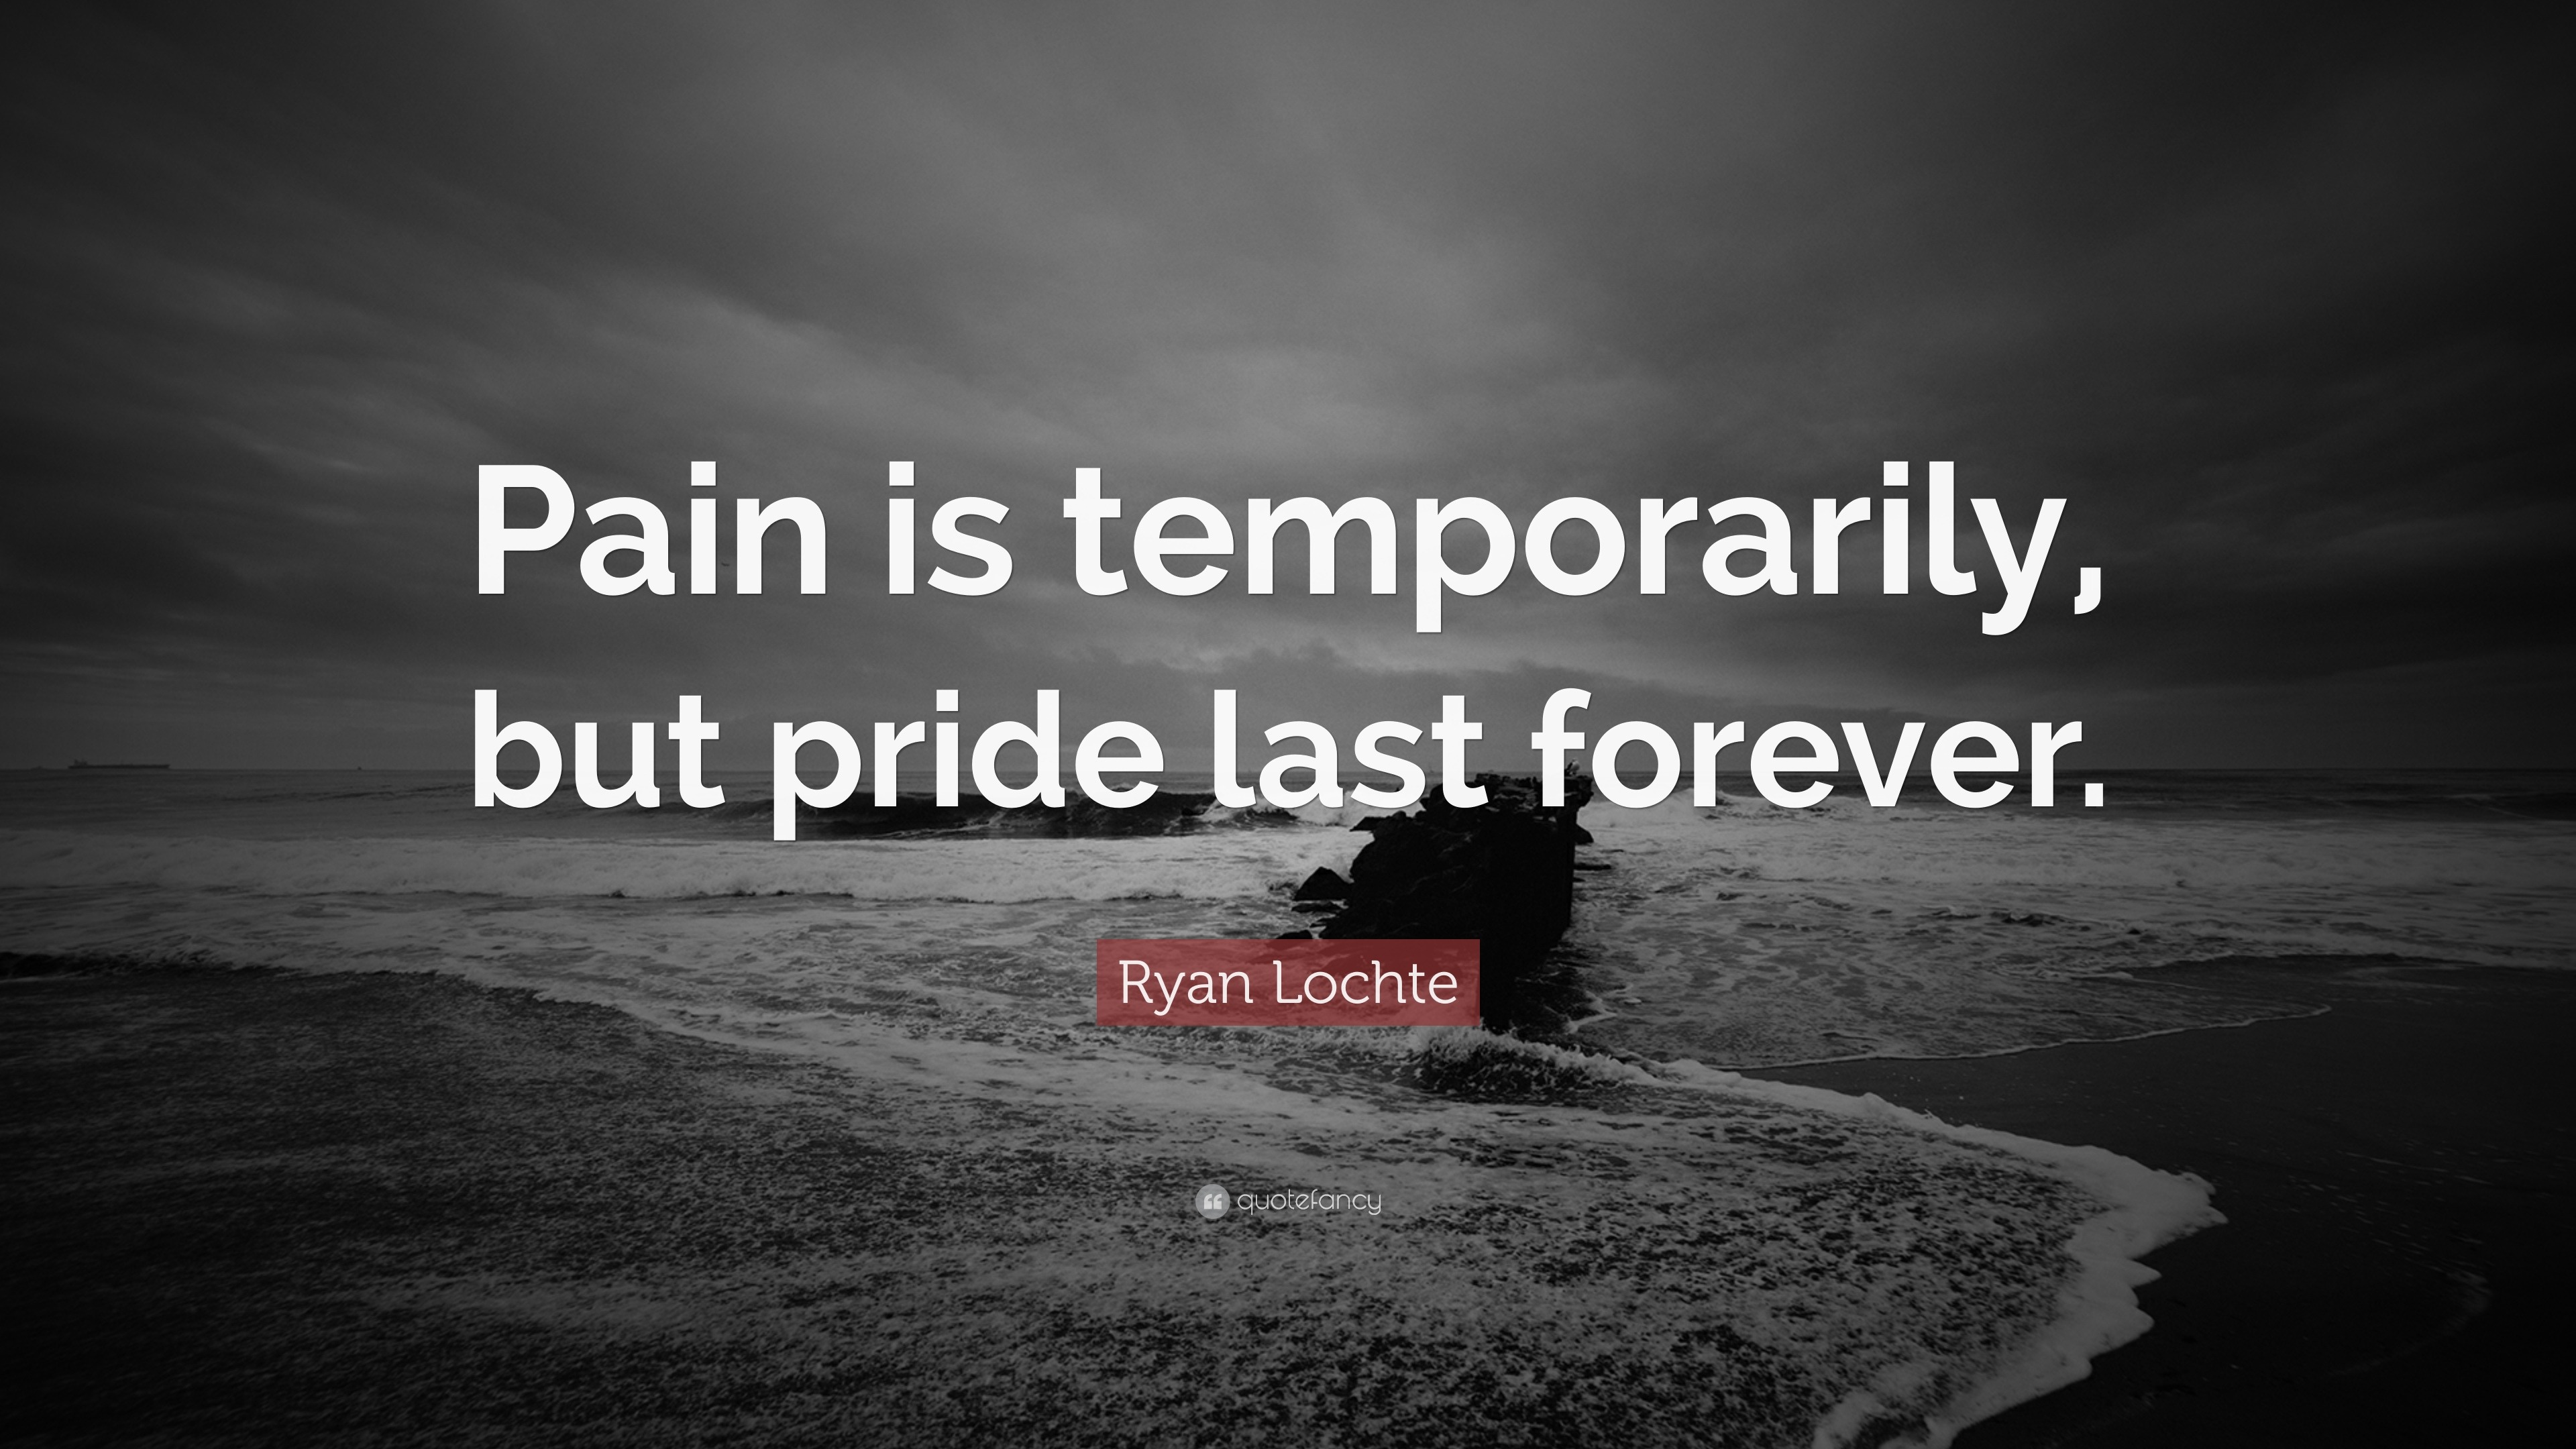 Ryan Lochte Quote: “Pain is temporarily, but pride last forever.”